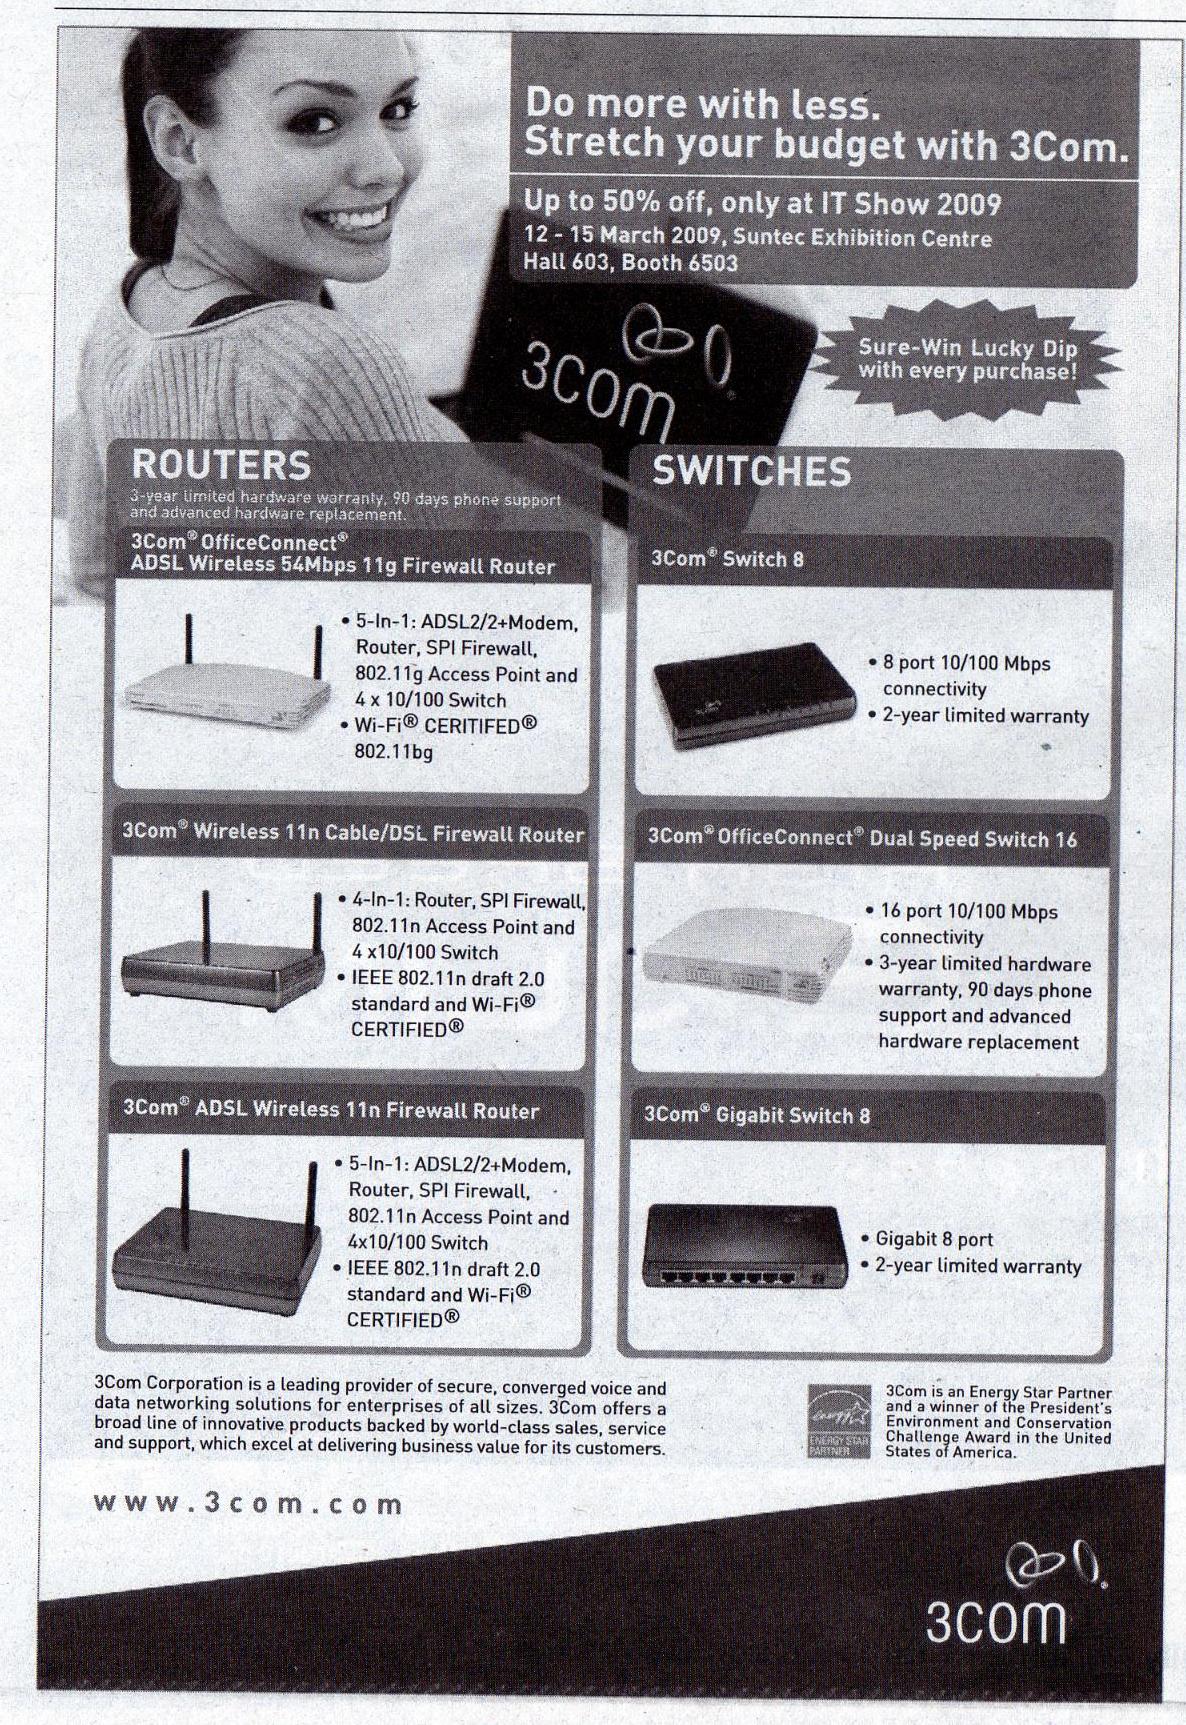 IT Show 2009 price list image brochure of 3com Routers Switches (coldfreeze)